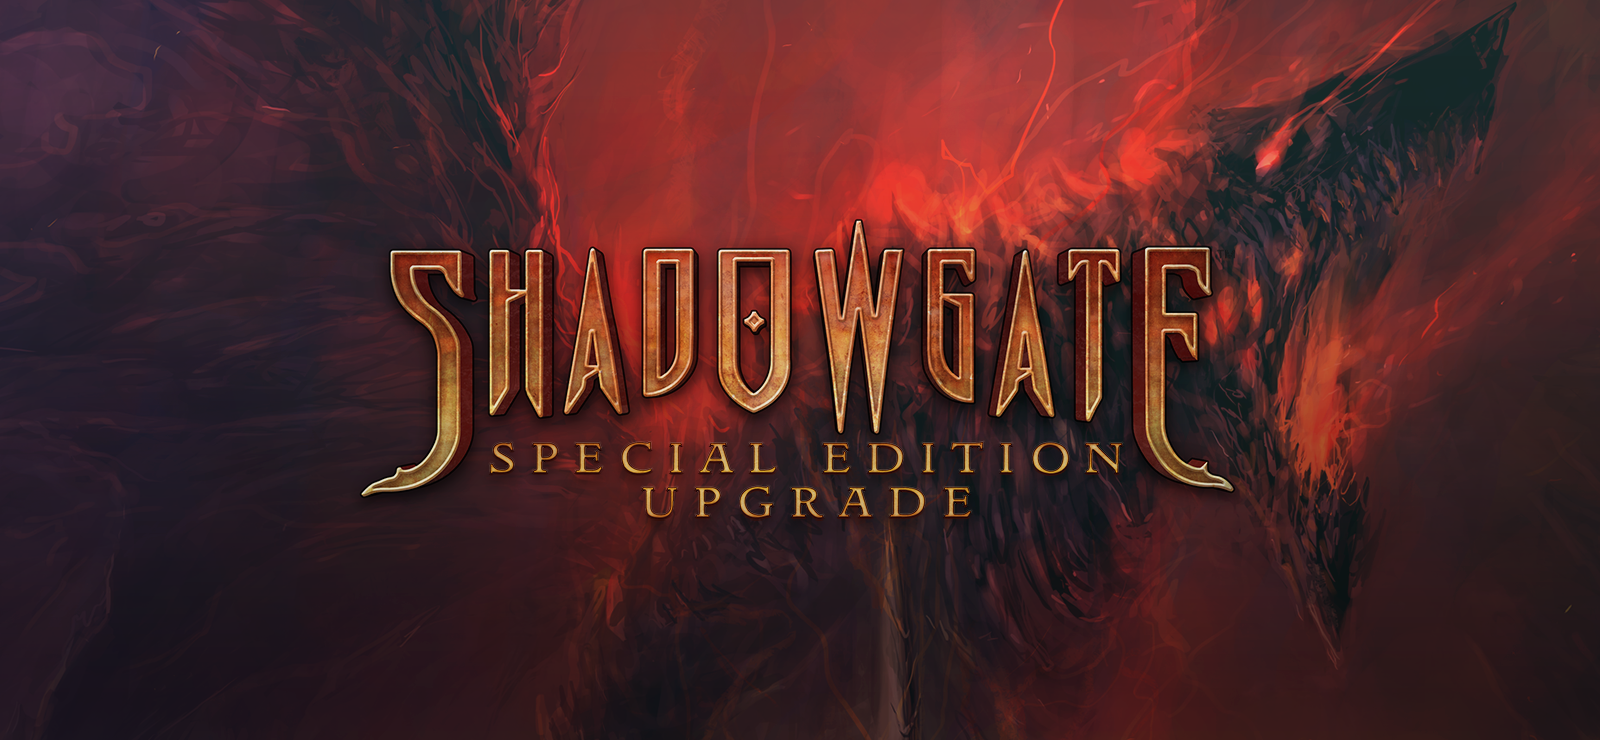 Shadowgate: Special Edition Upgrade